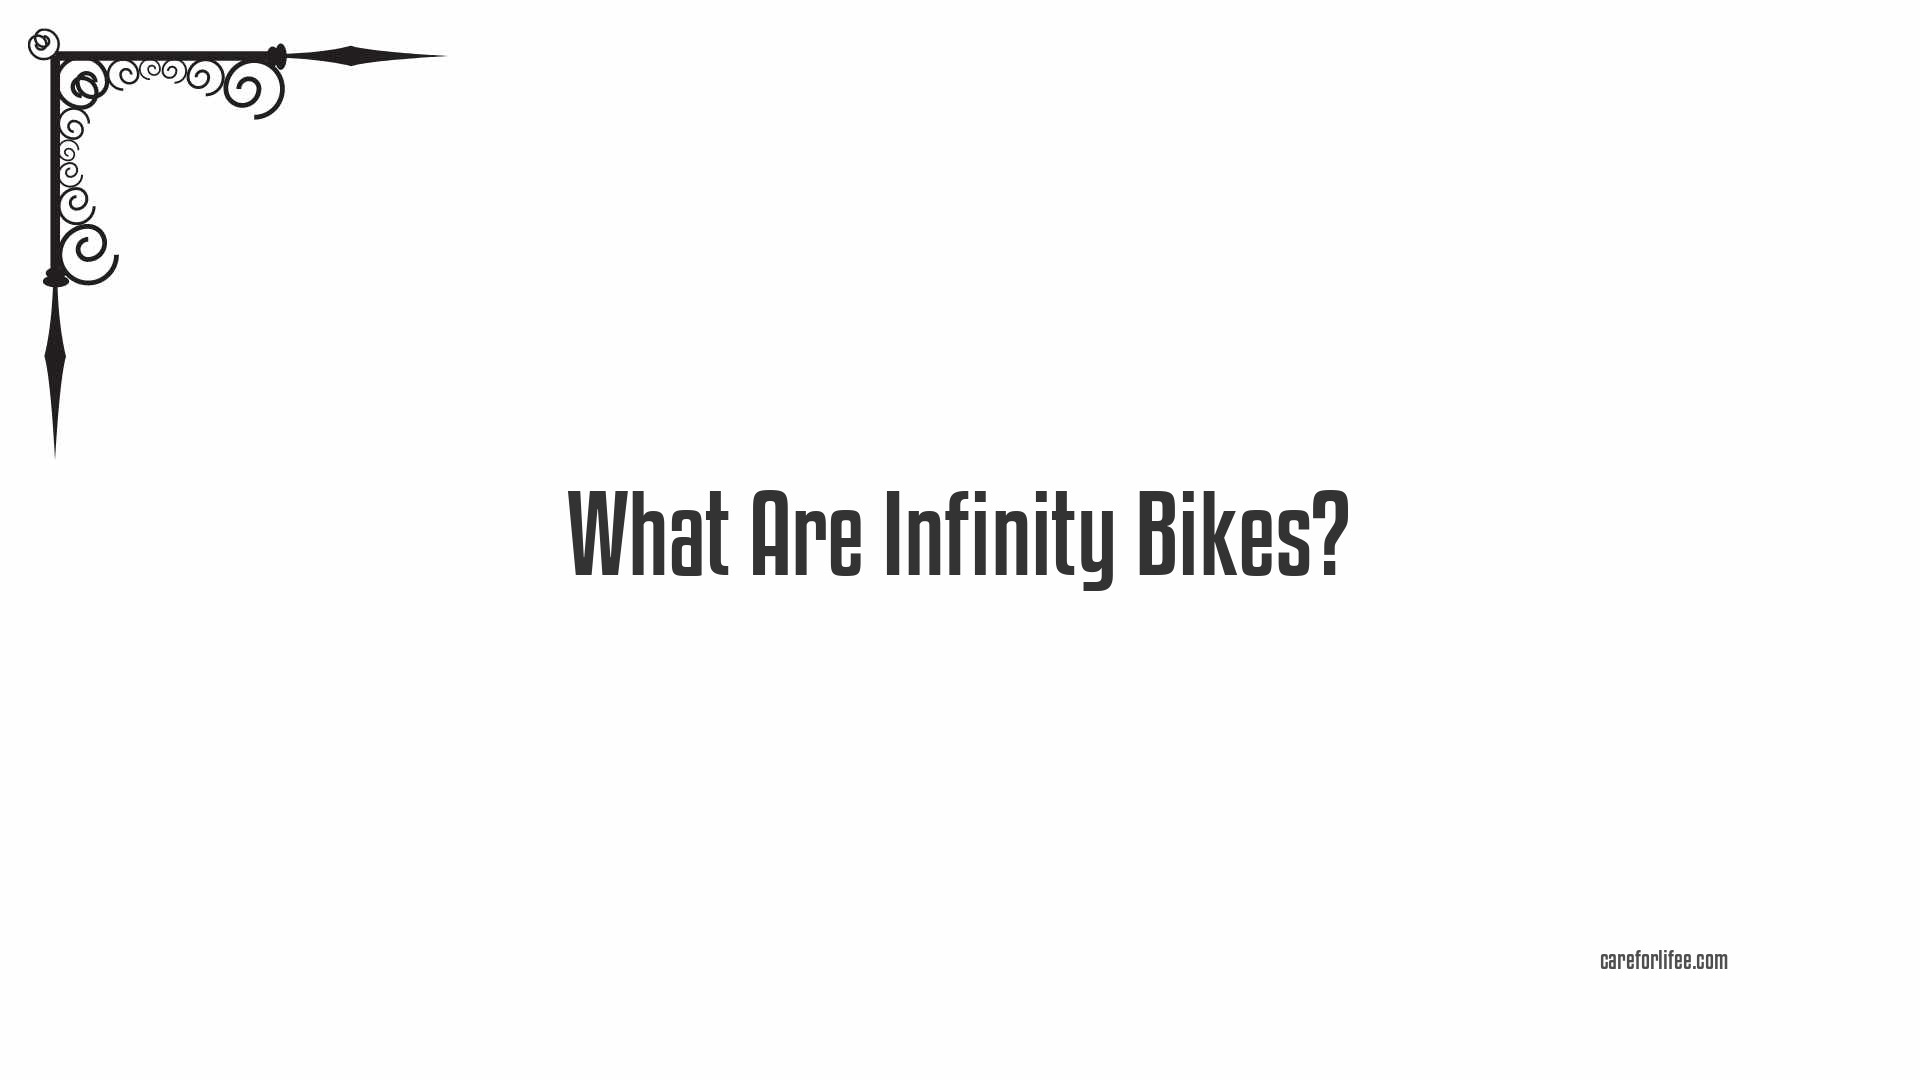 What Are Infinity Bikes?